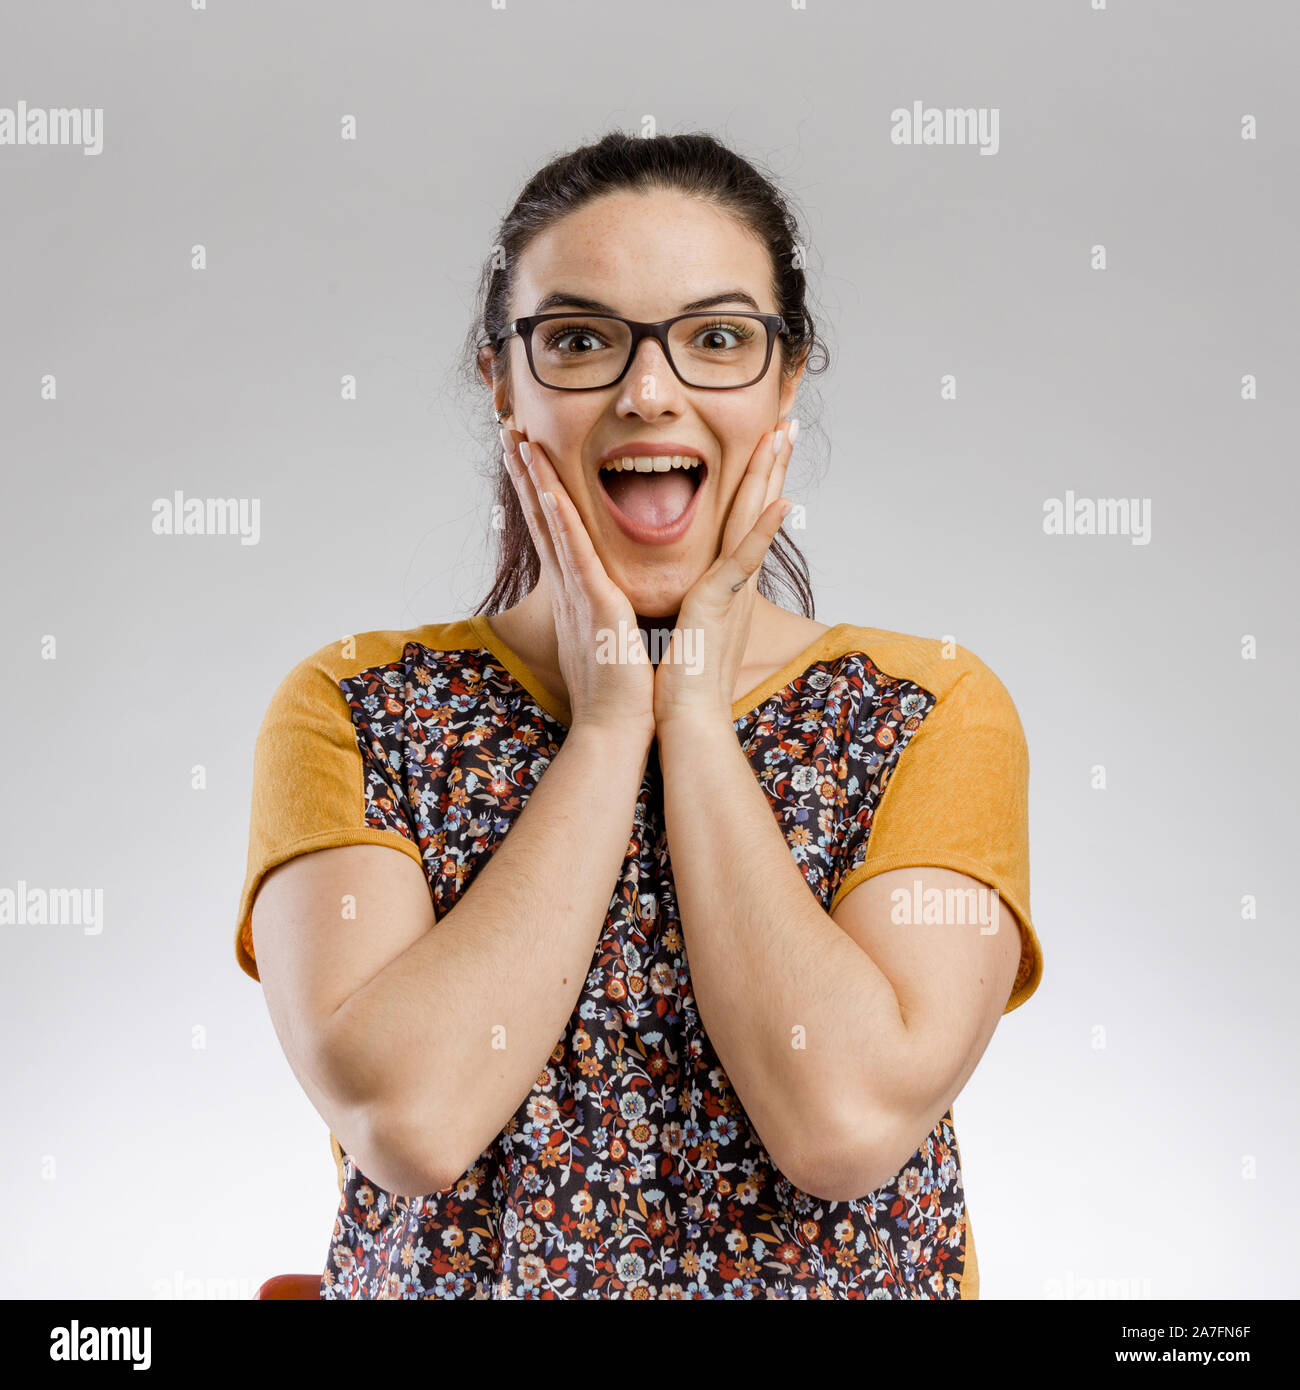 Portrait of woman making a happy face Stock Photo